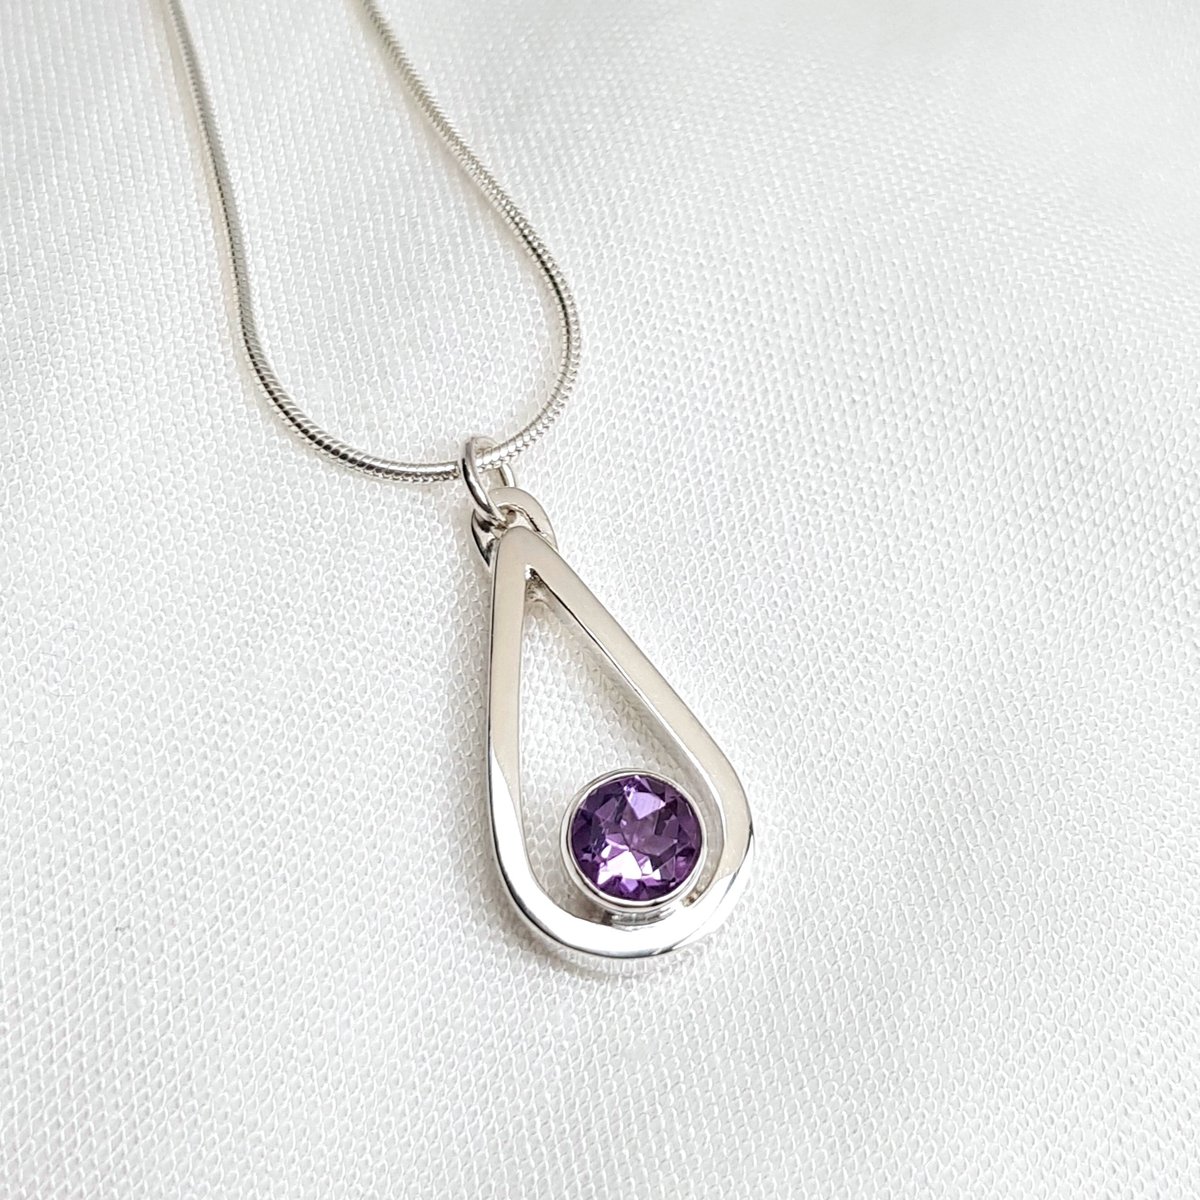 Image of Sterling Silver Amethyst Pendant Necklace, Teardrop Silver Necklace